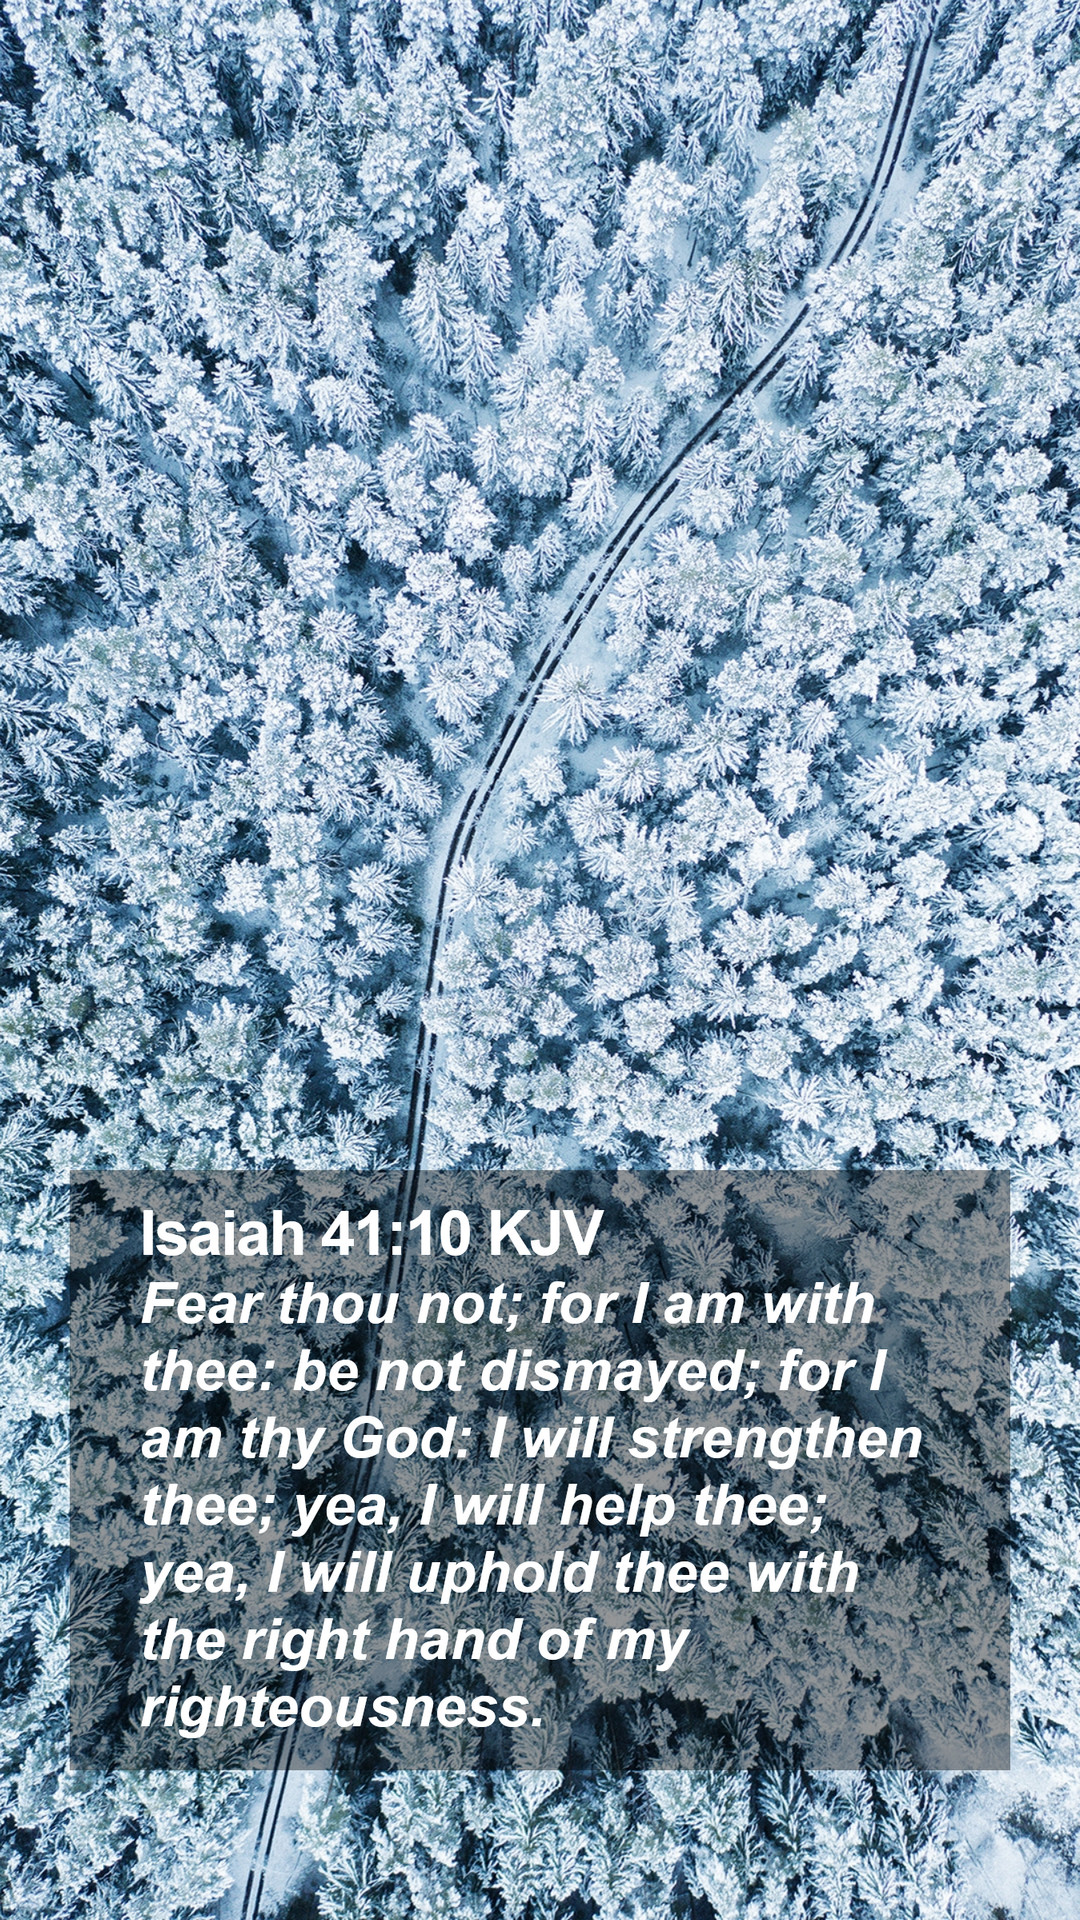 Isaiah 41:10 KJV Mobile Phone Wallpaper thou not; for I am with thee: be not